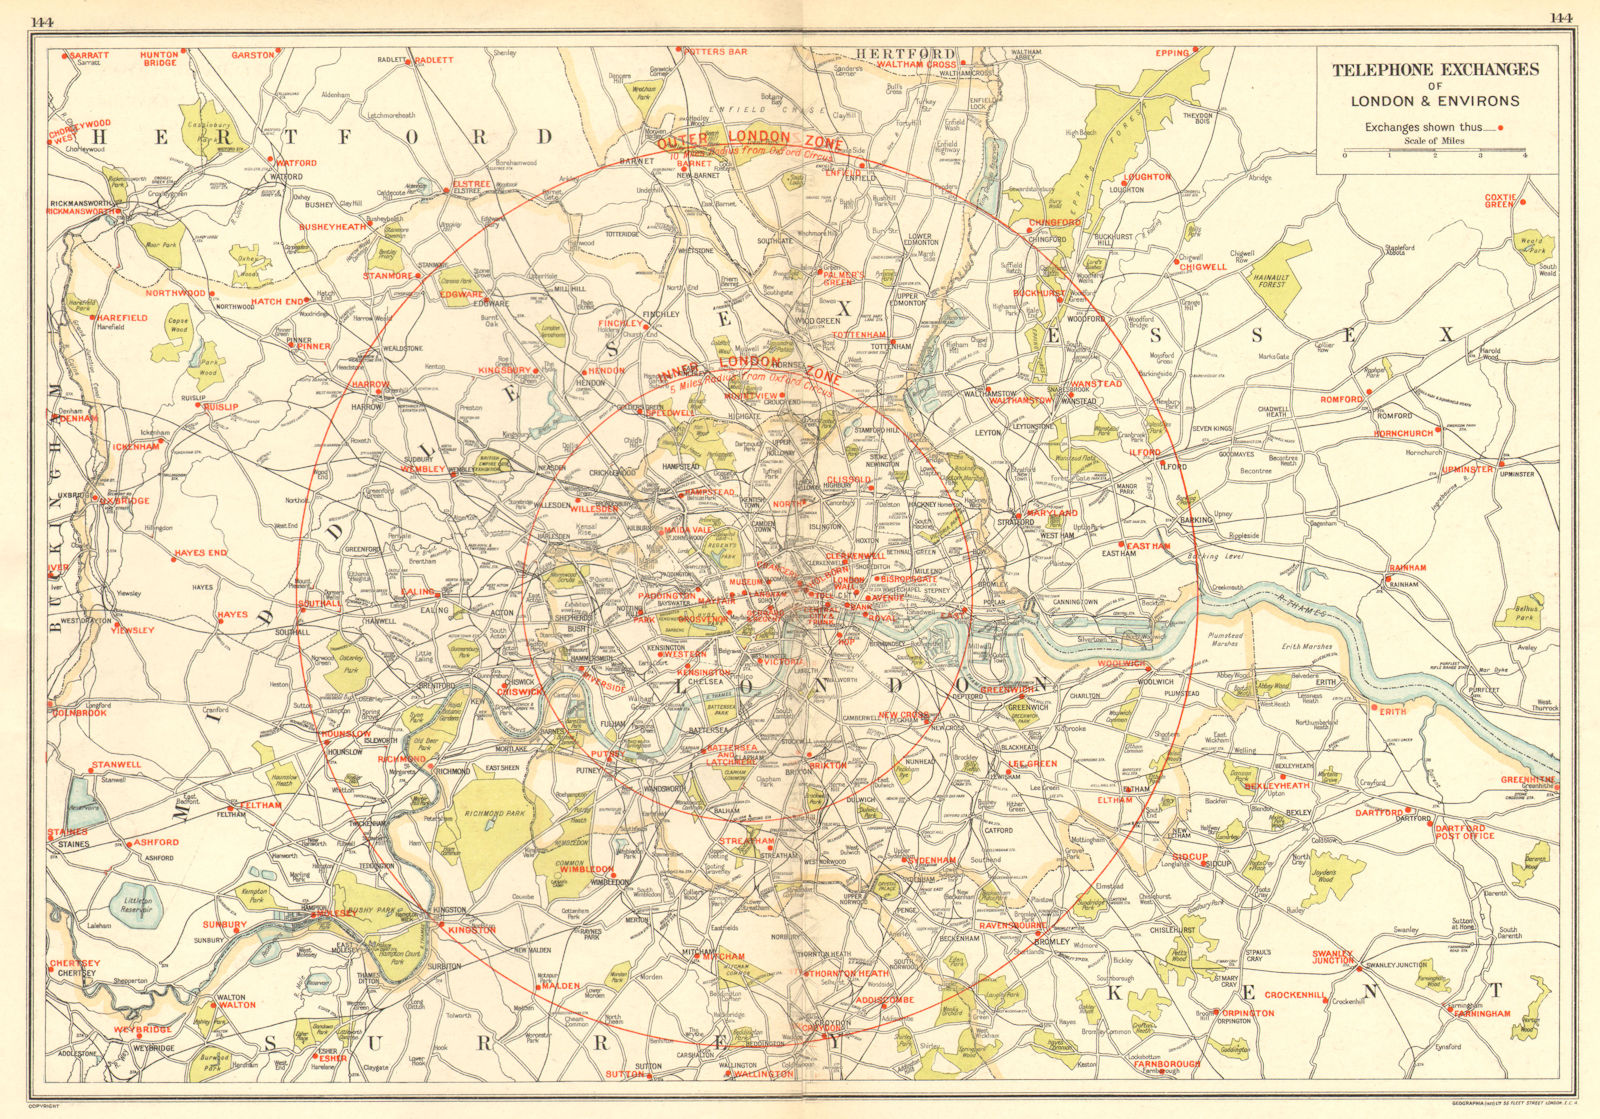 Associate Product LONDON. Telephone Exchanges of London & Environs 1923 old antique map chart